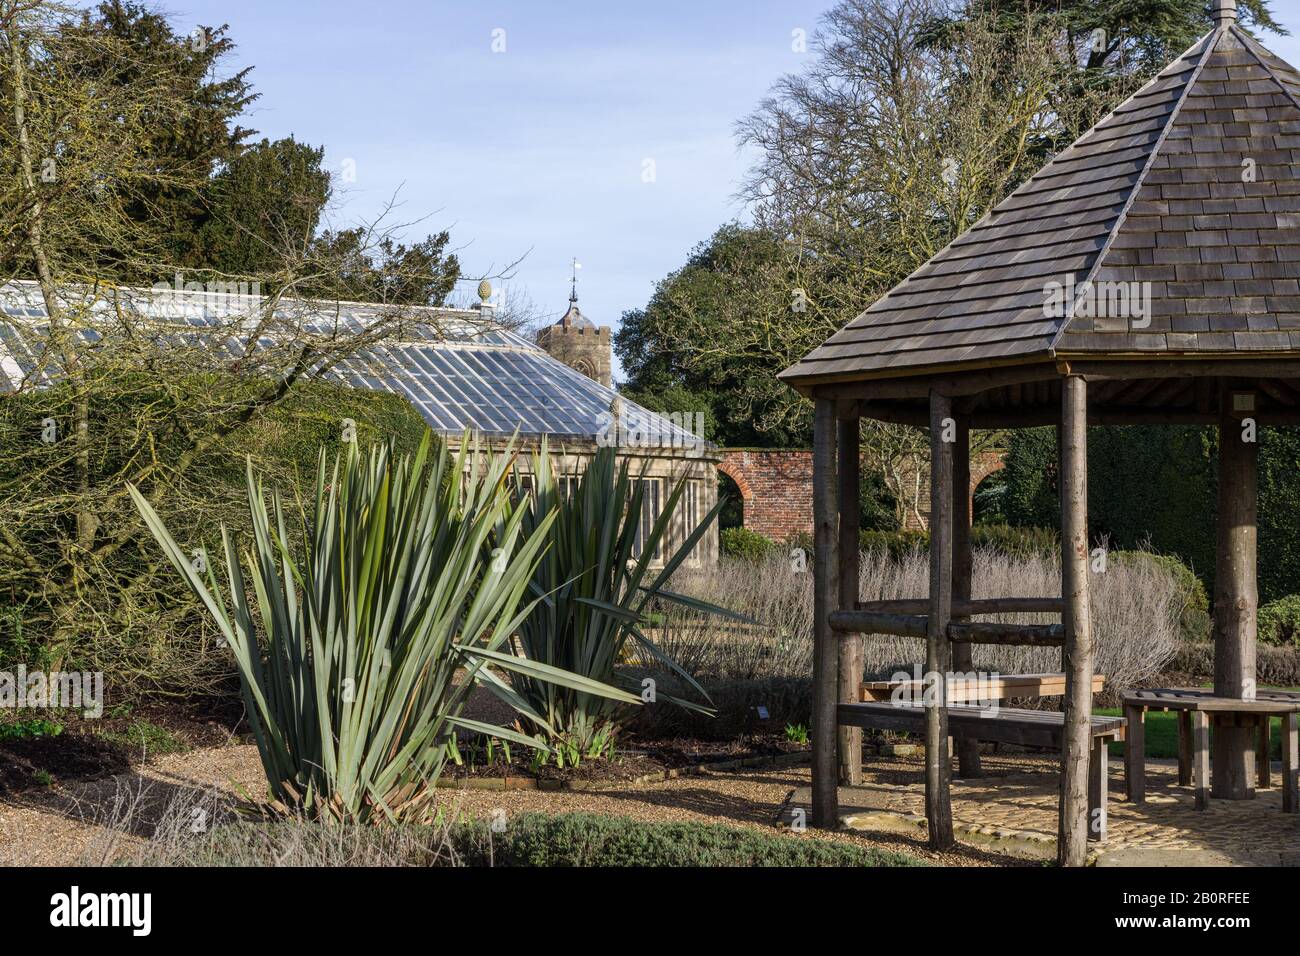 A cold but sunny Winter day at Castle Ashby Gardens, Northamptonshire, UK; pergola, greenhouse and a distant church tower Stock Photo